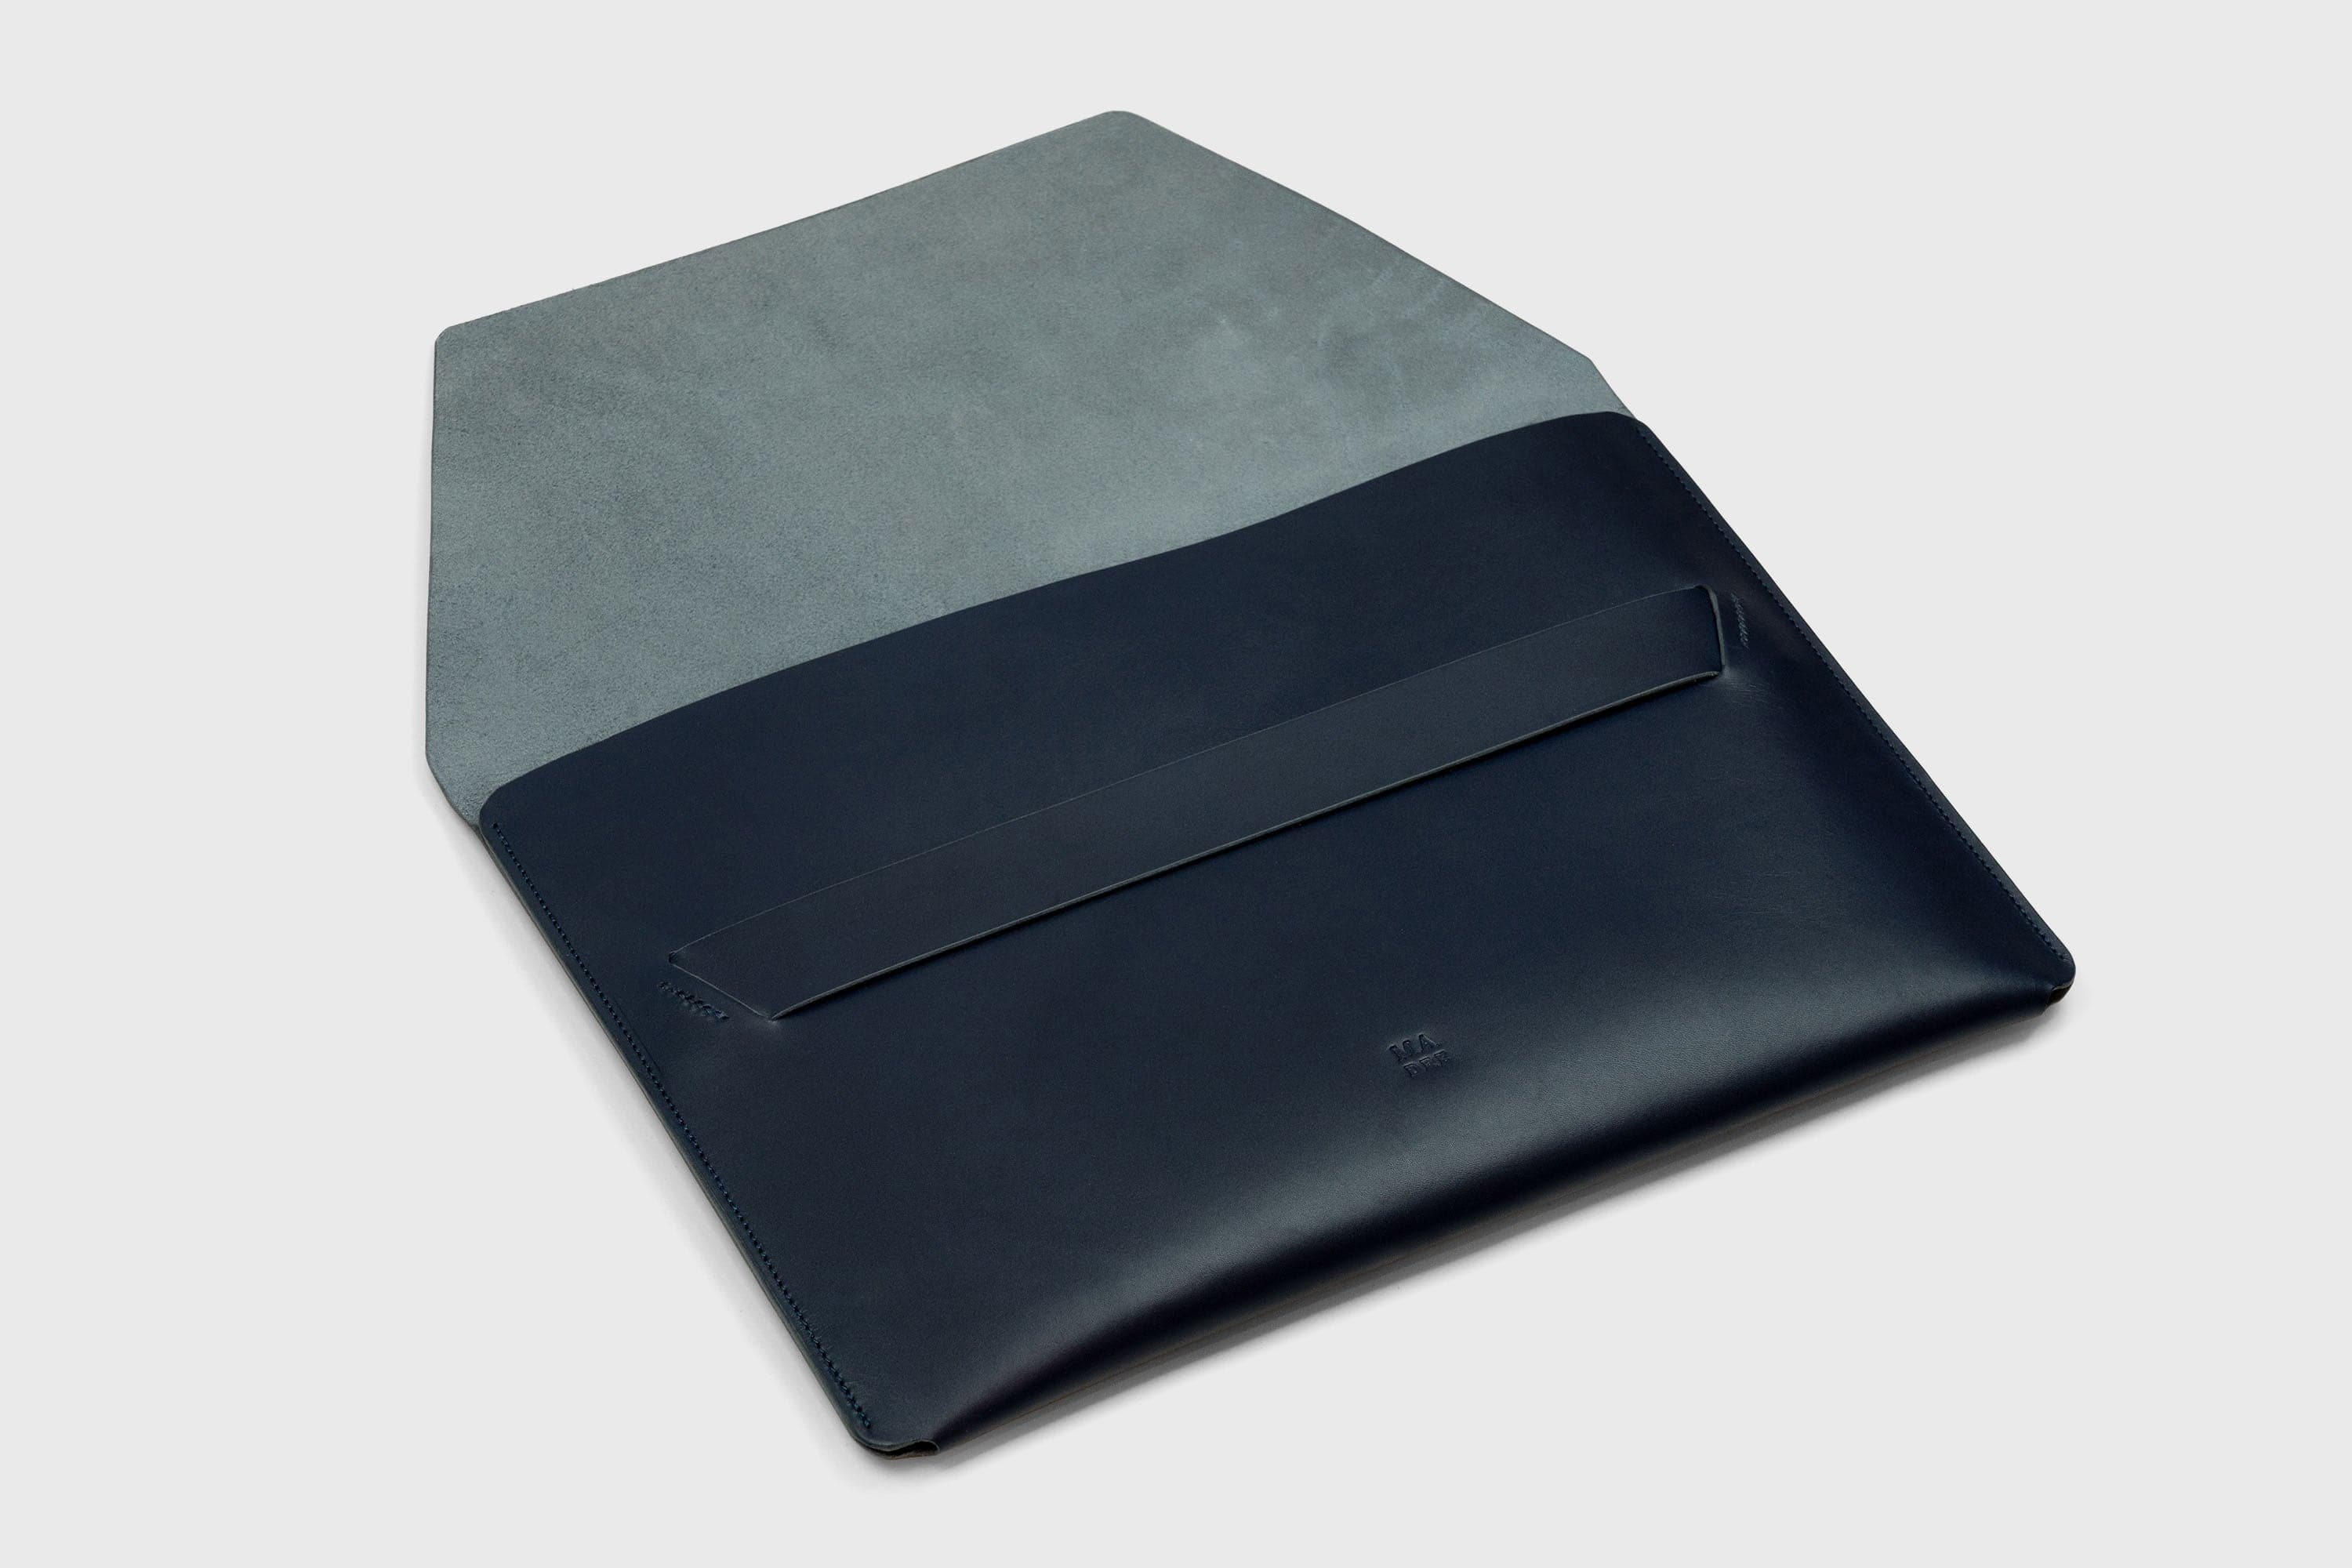 MacBook Sleeve 16 Inch Leather Dark Marine Blue Computer Bag Vegetable Tanned Leather Exclusive Quality Design By Manuel Dreesmann Atelier Madre Barcelona Spain